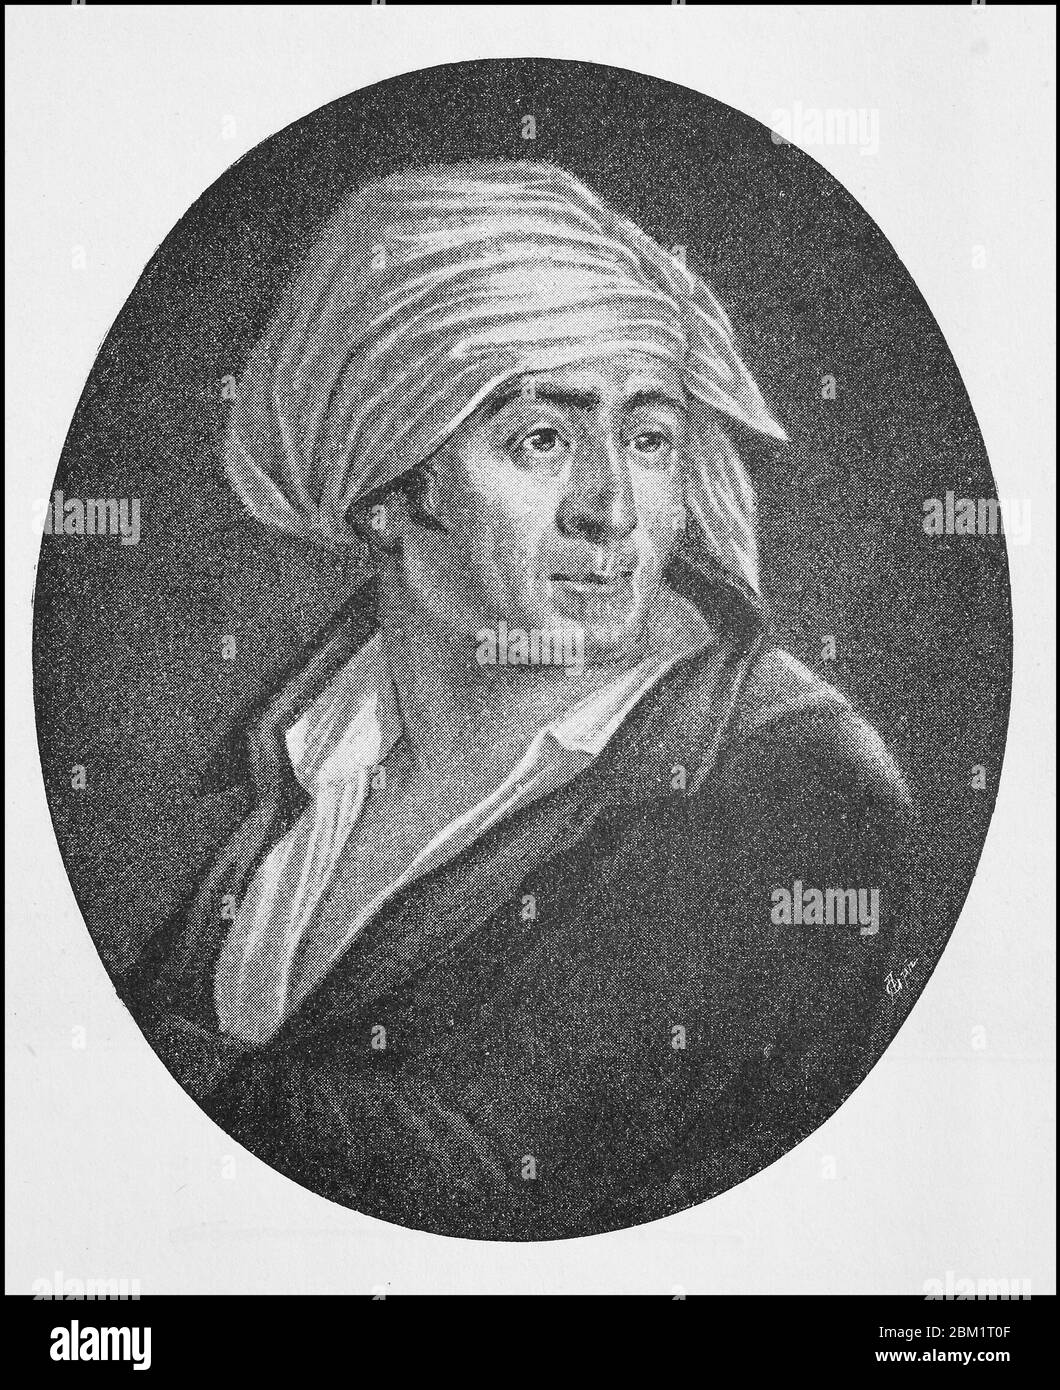 Jean-Paul Marat, May 24 1743 - July 13, 1793, was a French physician, scientist and author of scientific and political writings, during the French Revolution moved and he wrote the Ami du Peuple, a demagogic newspaper  /  Jean Paul Marat, 24. Mai 1743 - 13. Juli 1793, war ein französischer Arzt, Naturwissenschaftler und Verfasser naturwissenschaftlicher und politischer Schriften, während der Französischen Revolution verlegte und schrieb er den Ami du Peuple, eine demagogische Zeitung, Historisch, historical, digital improved reproduction of an original from the 19th century / digitale Reproduk Stock Photo